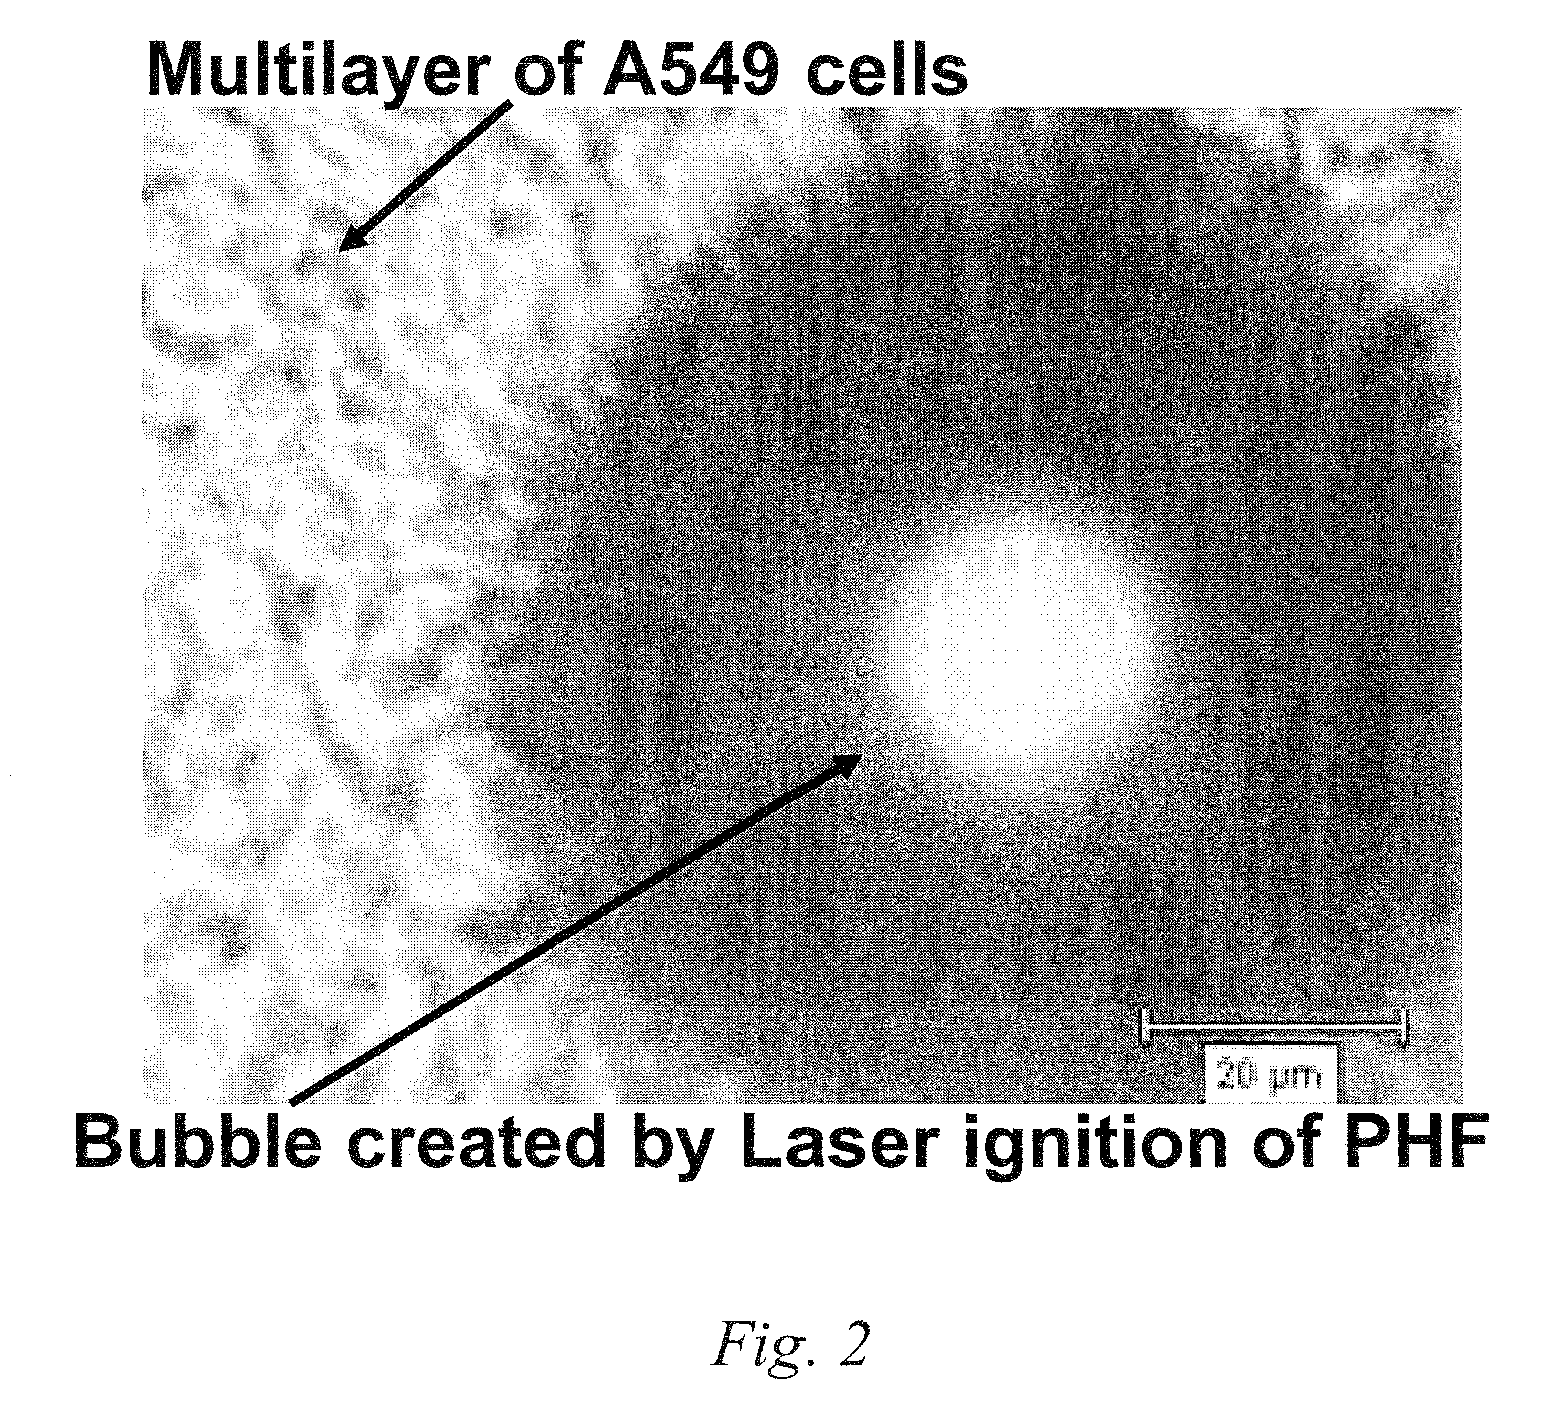 Systems and methods based on radiation induced heating or ignition of functionalized fullerenes